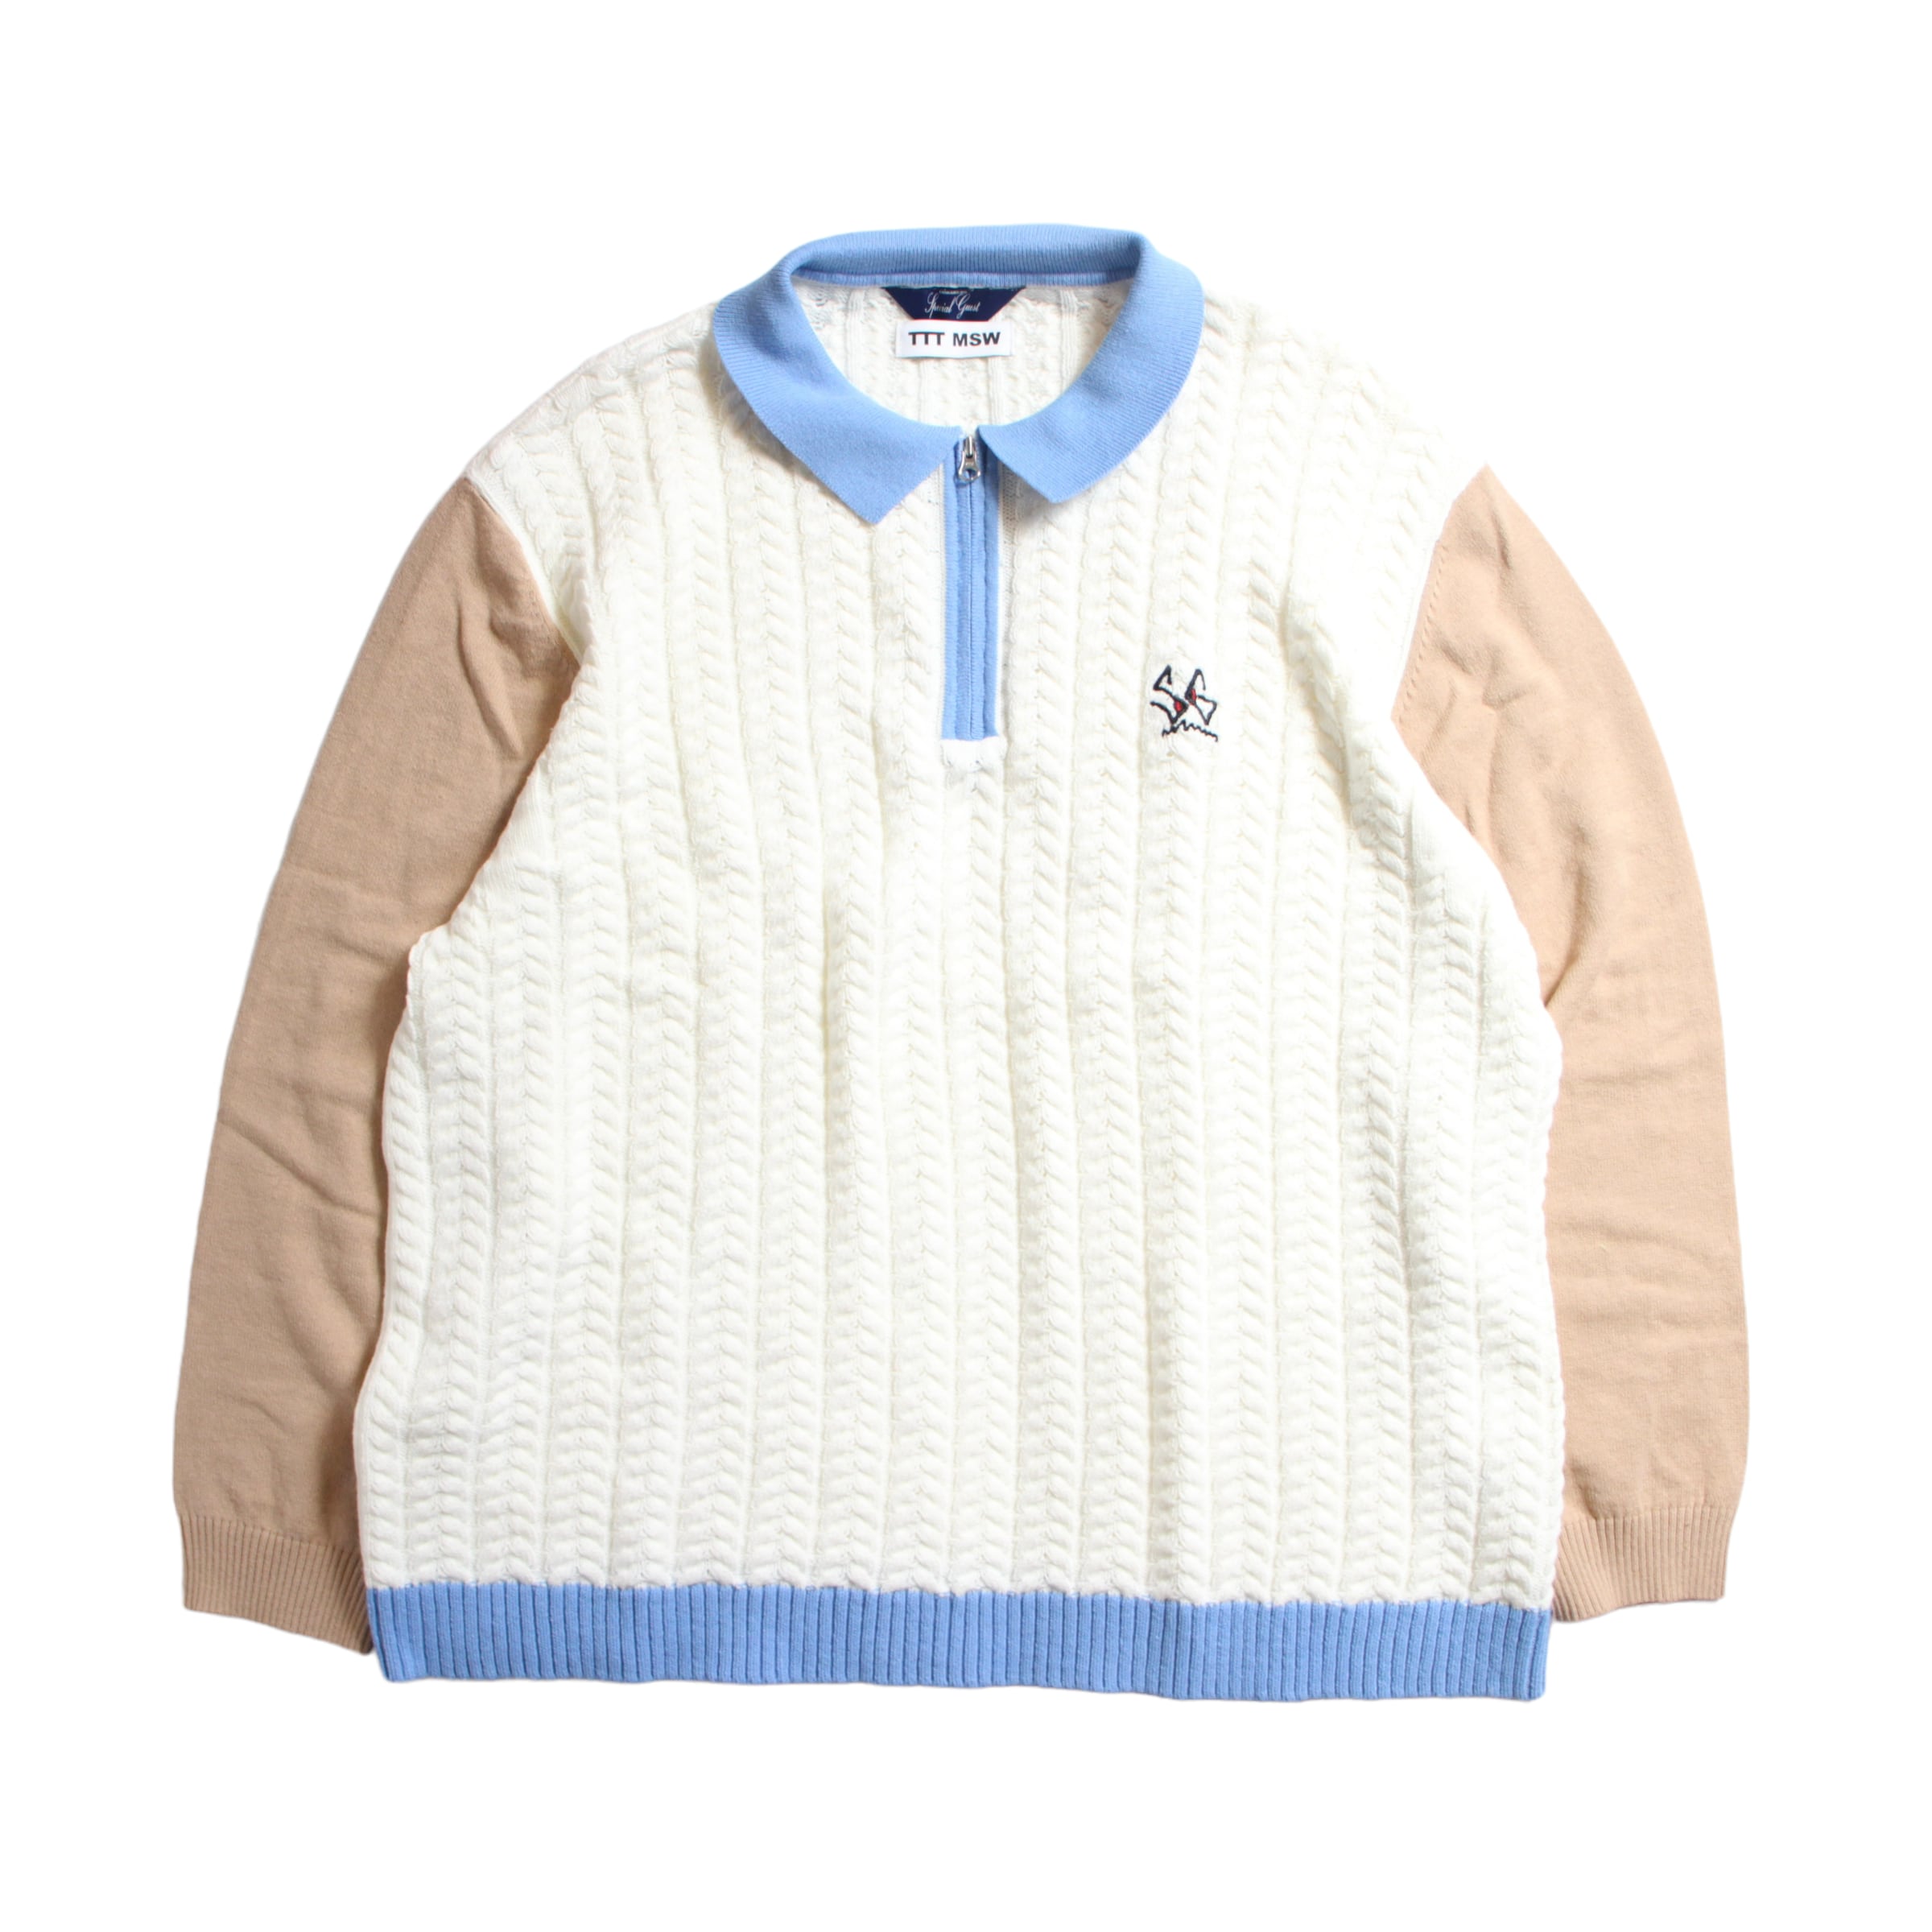 TTT-MSW×SPECIAL GUEST Knit Polo | brandselect